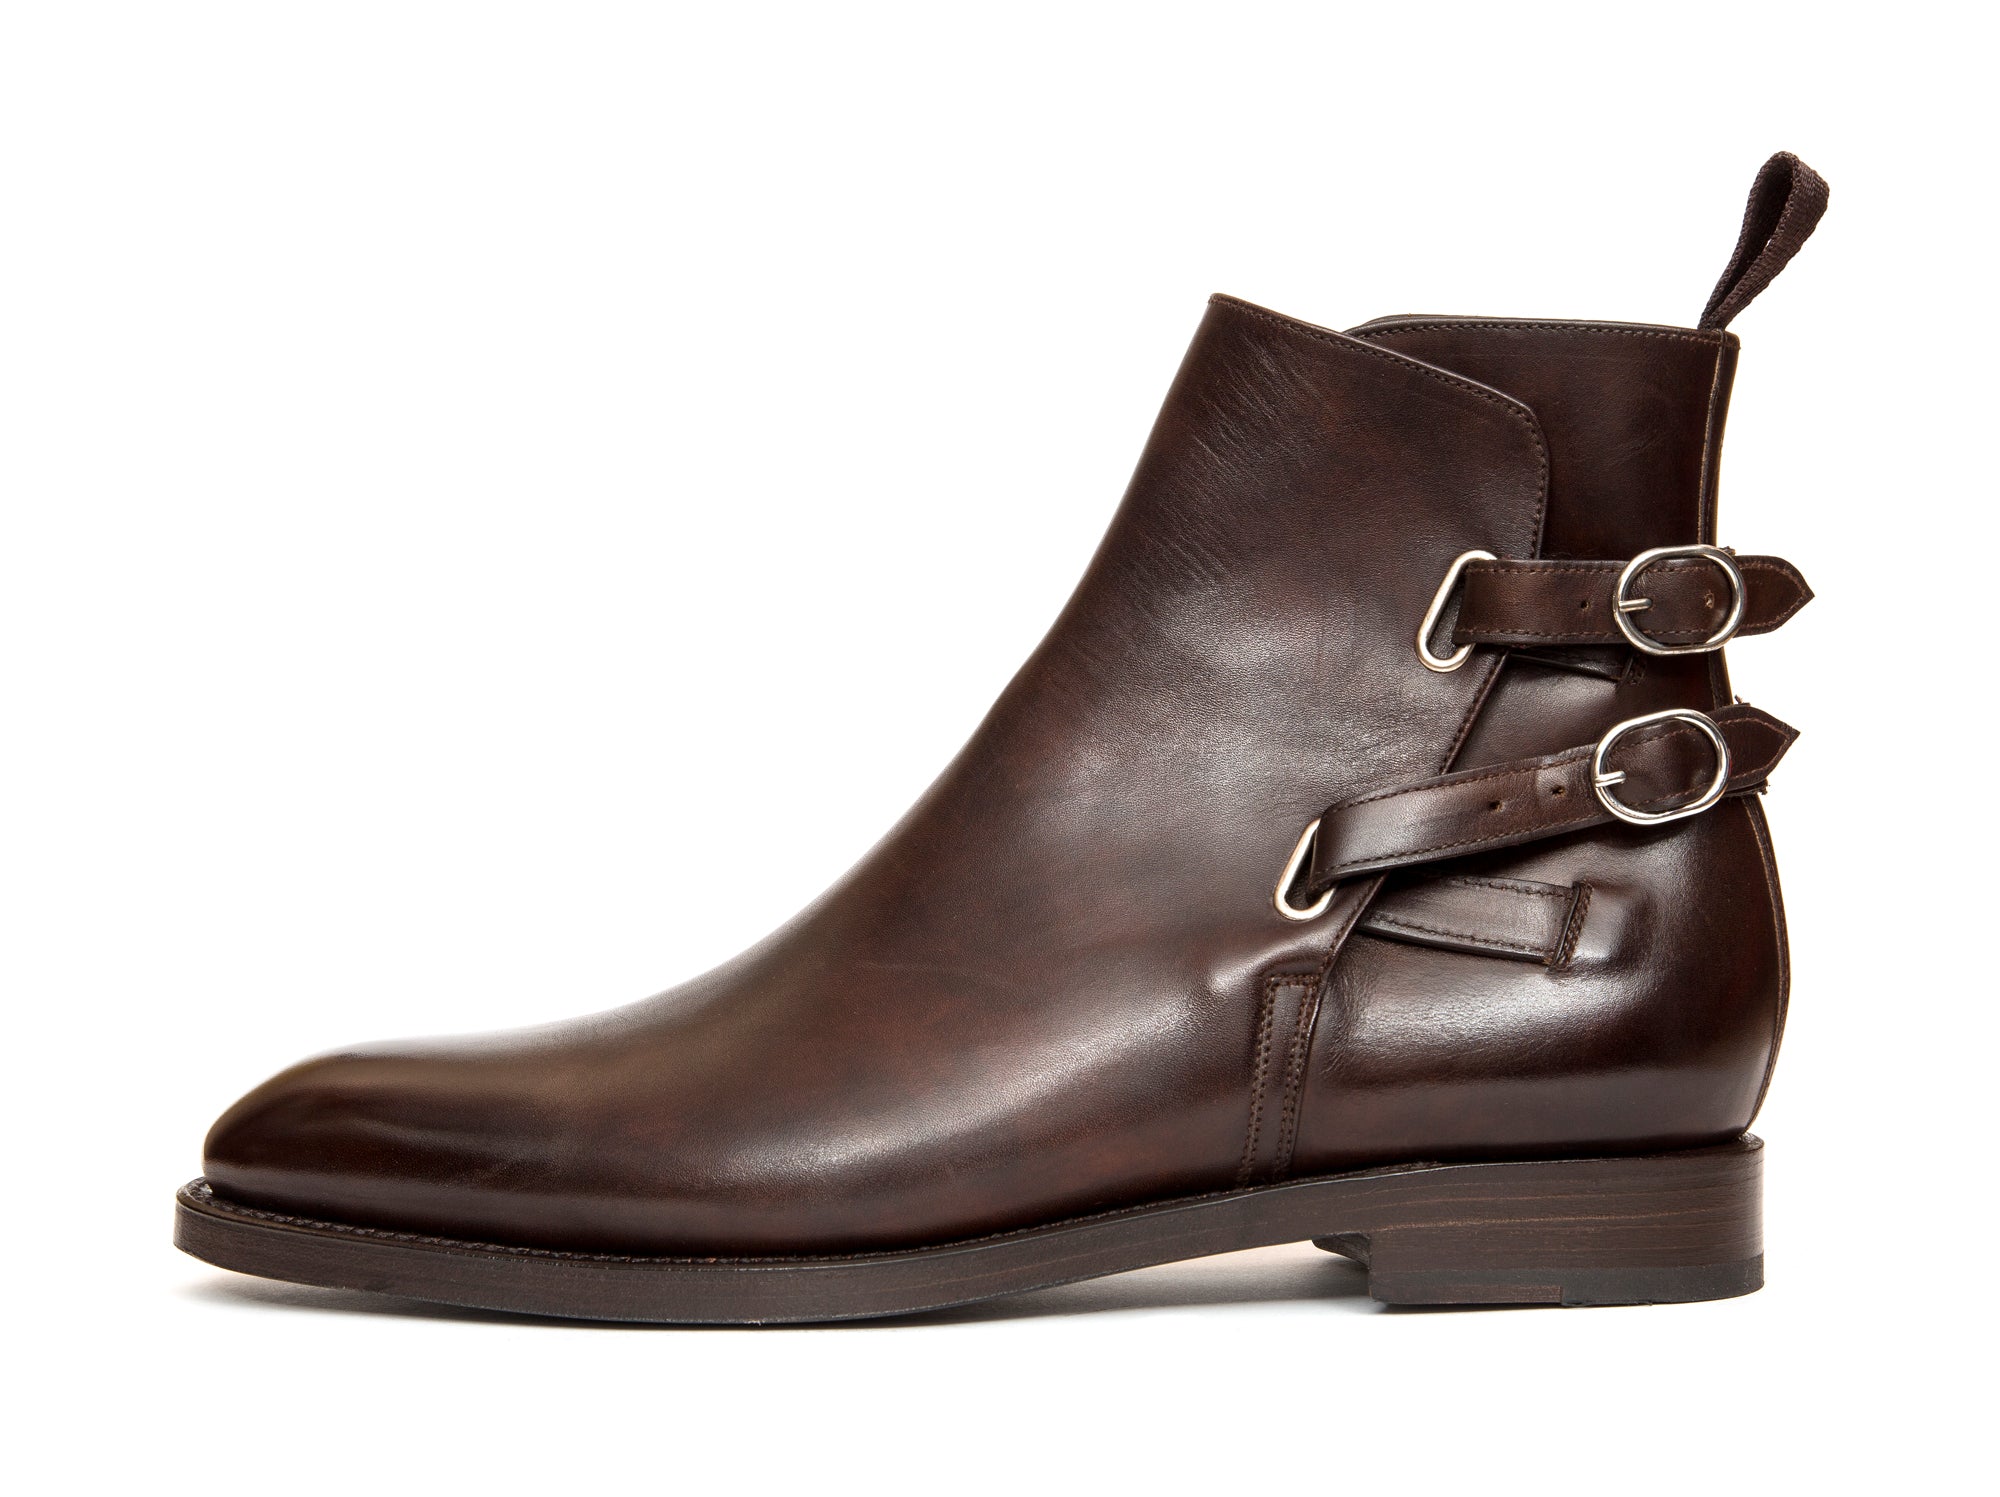 Genesee - MTO - Dark Brown Museum Calf - NGT Last - Double Leather Sole